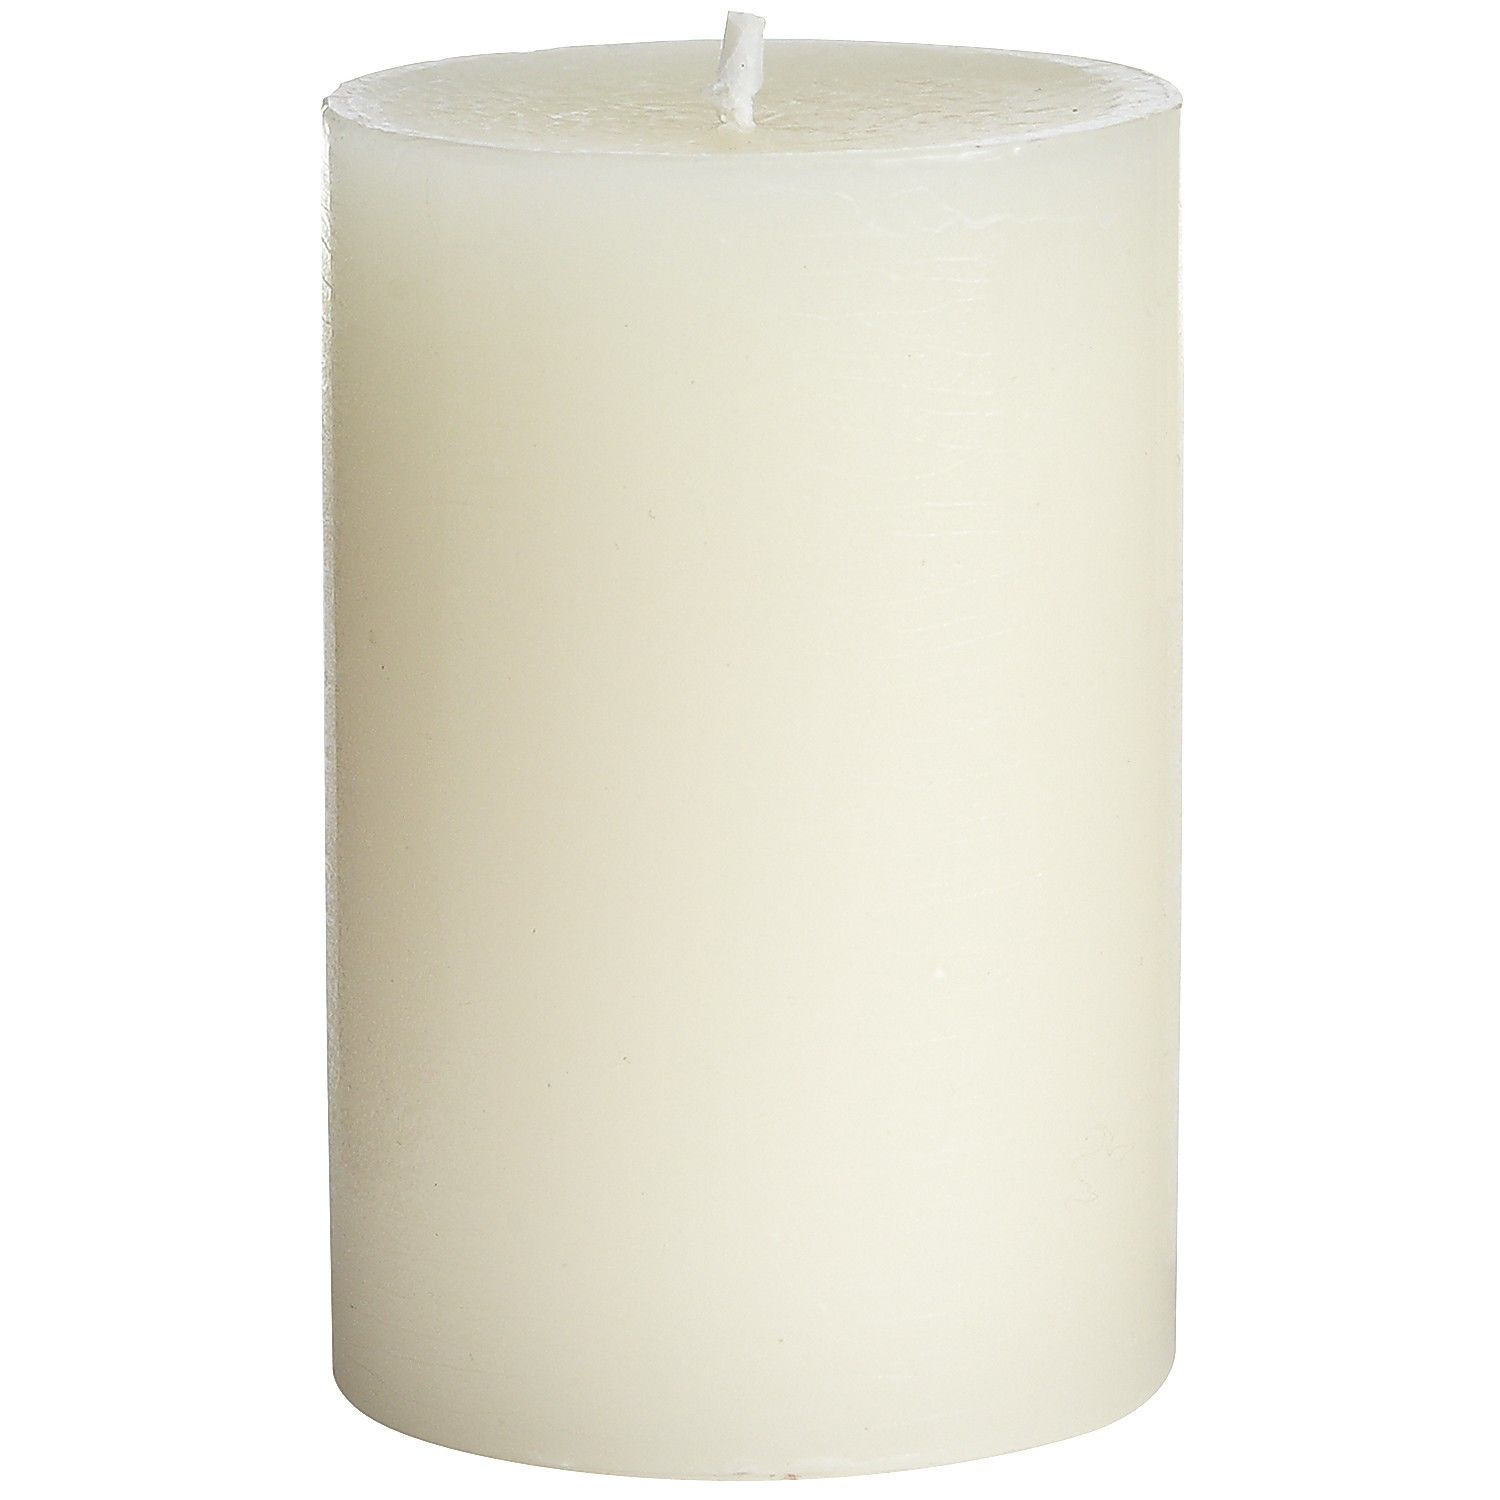 Unscented Ivory 2x3 Pillar Candle | Pier 1 Imports